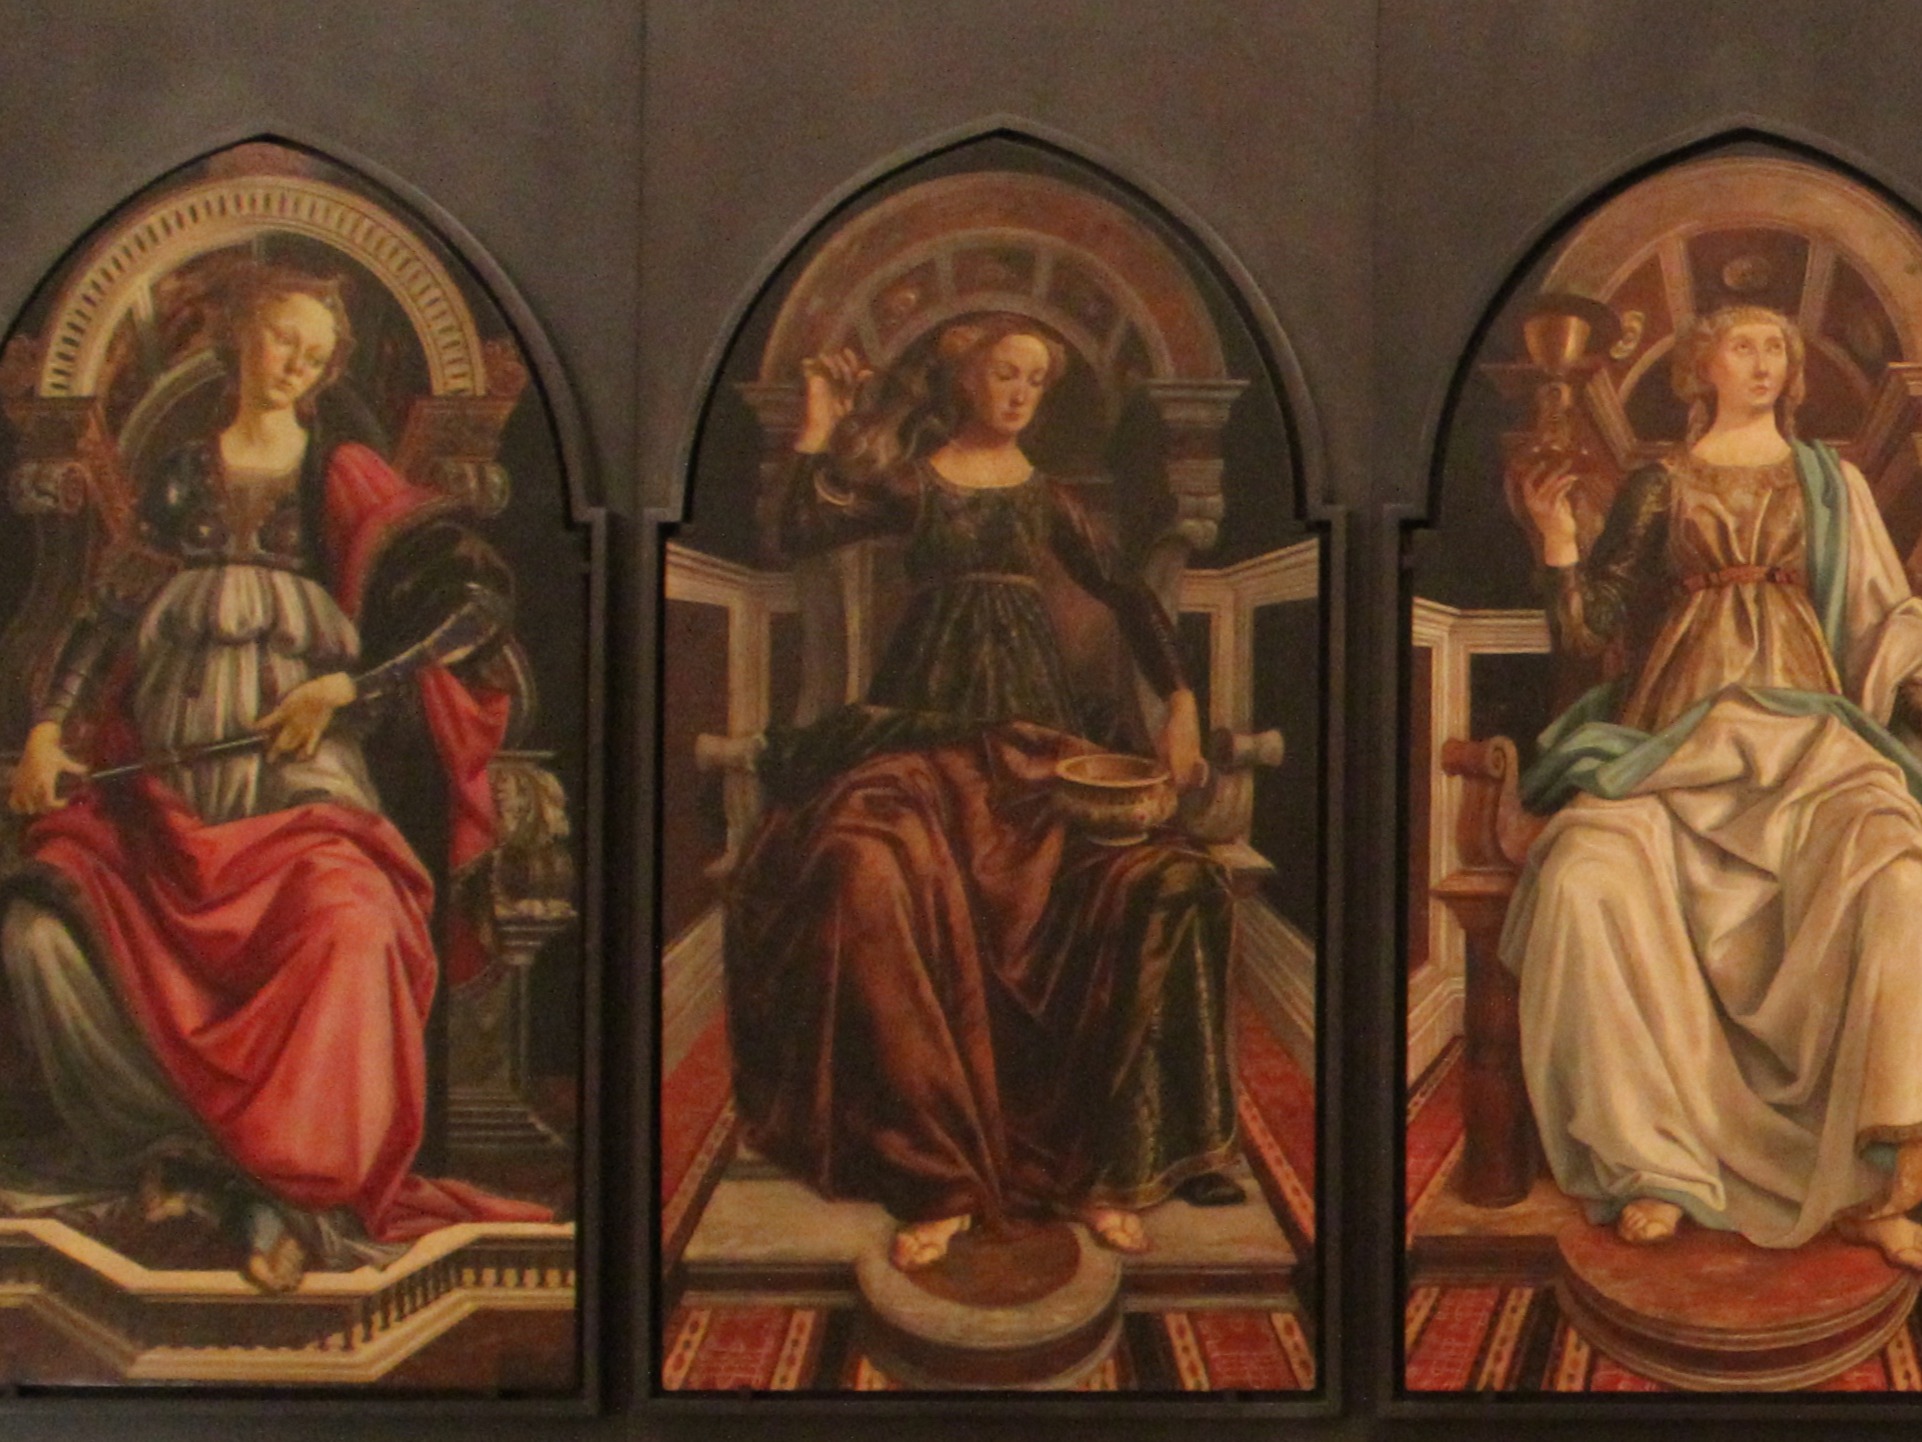 Late Medieval triptych depicting the three virtues